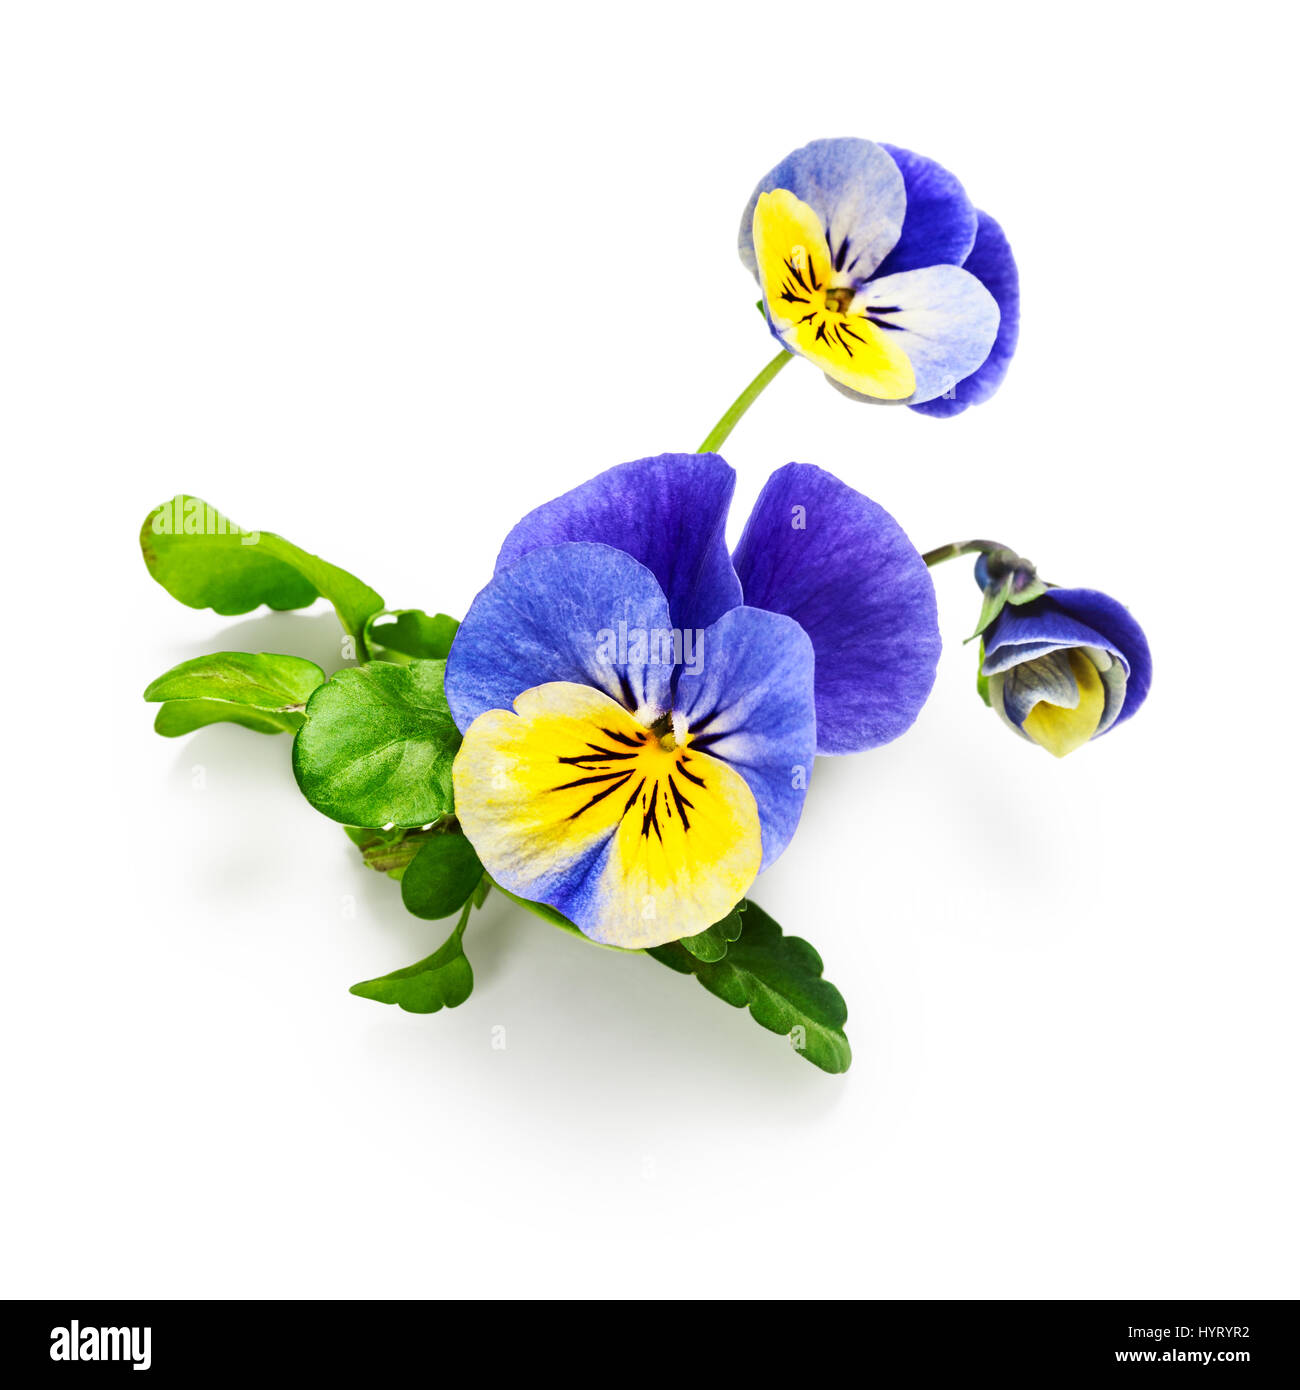 Pansy flowers with leaves isolated on white background clipping path included. Spring garden viola tricolor Stock Photo